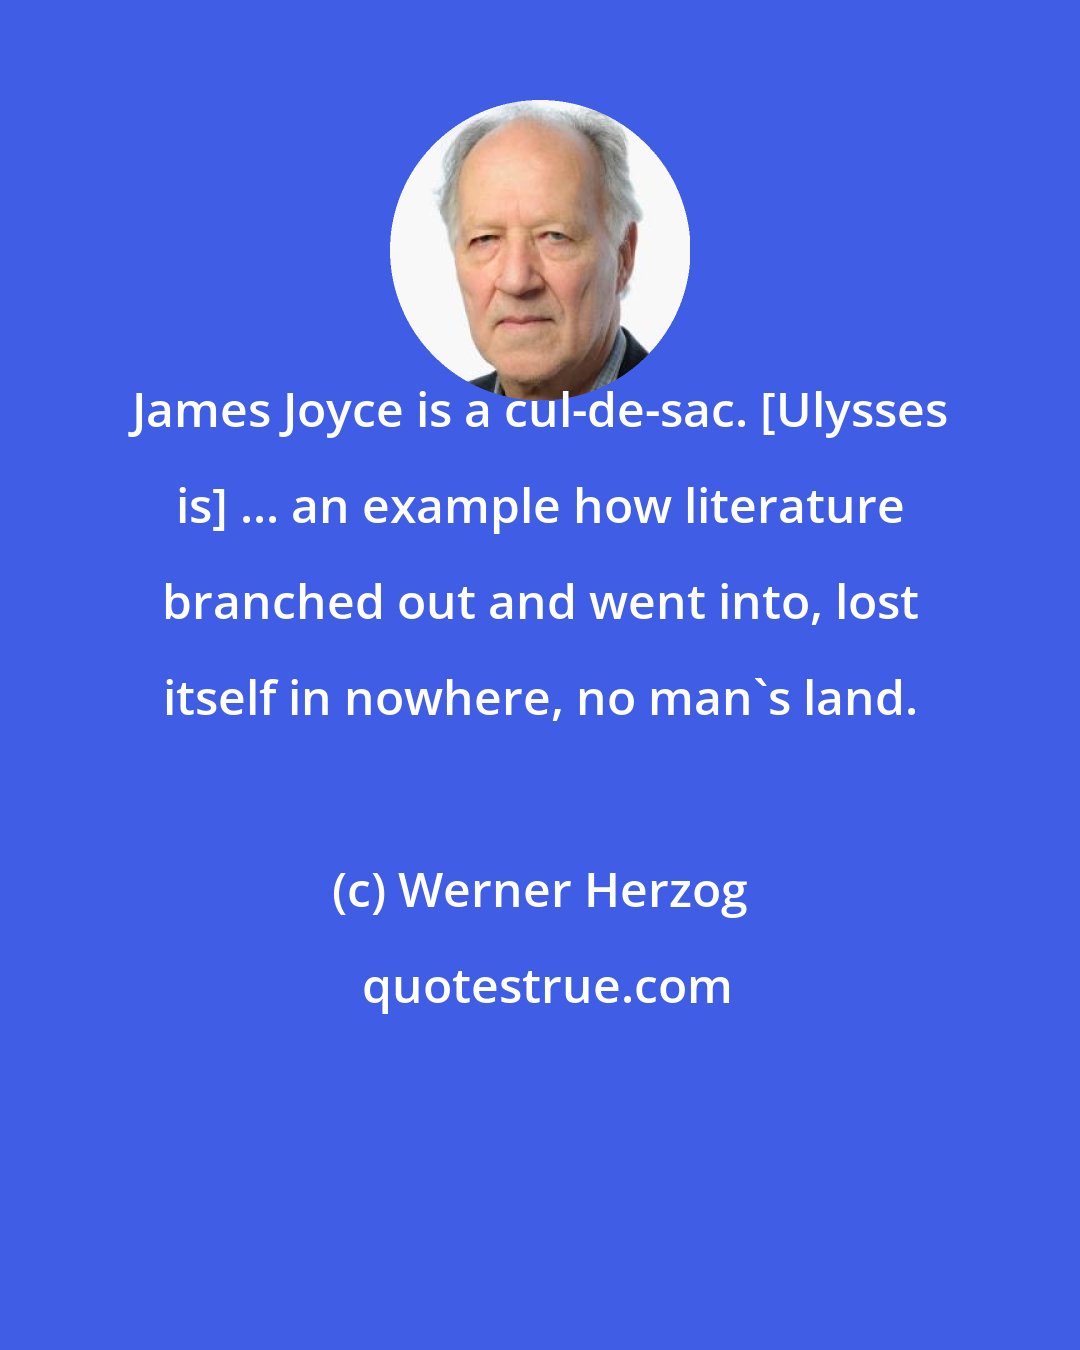 Werner Herzog: James Joyce is a cul-de-sac. [Ulysses is] ... an example how literature branched out and went into, lost itself in nowhere, no man's land.